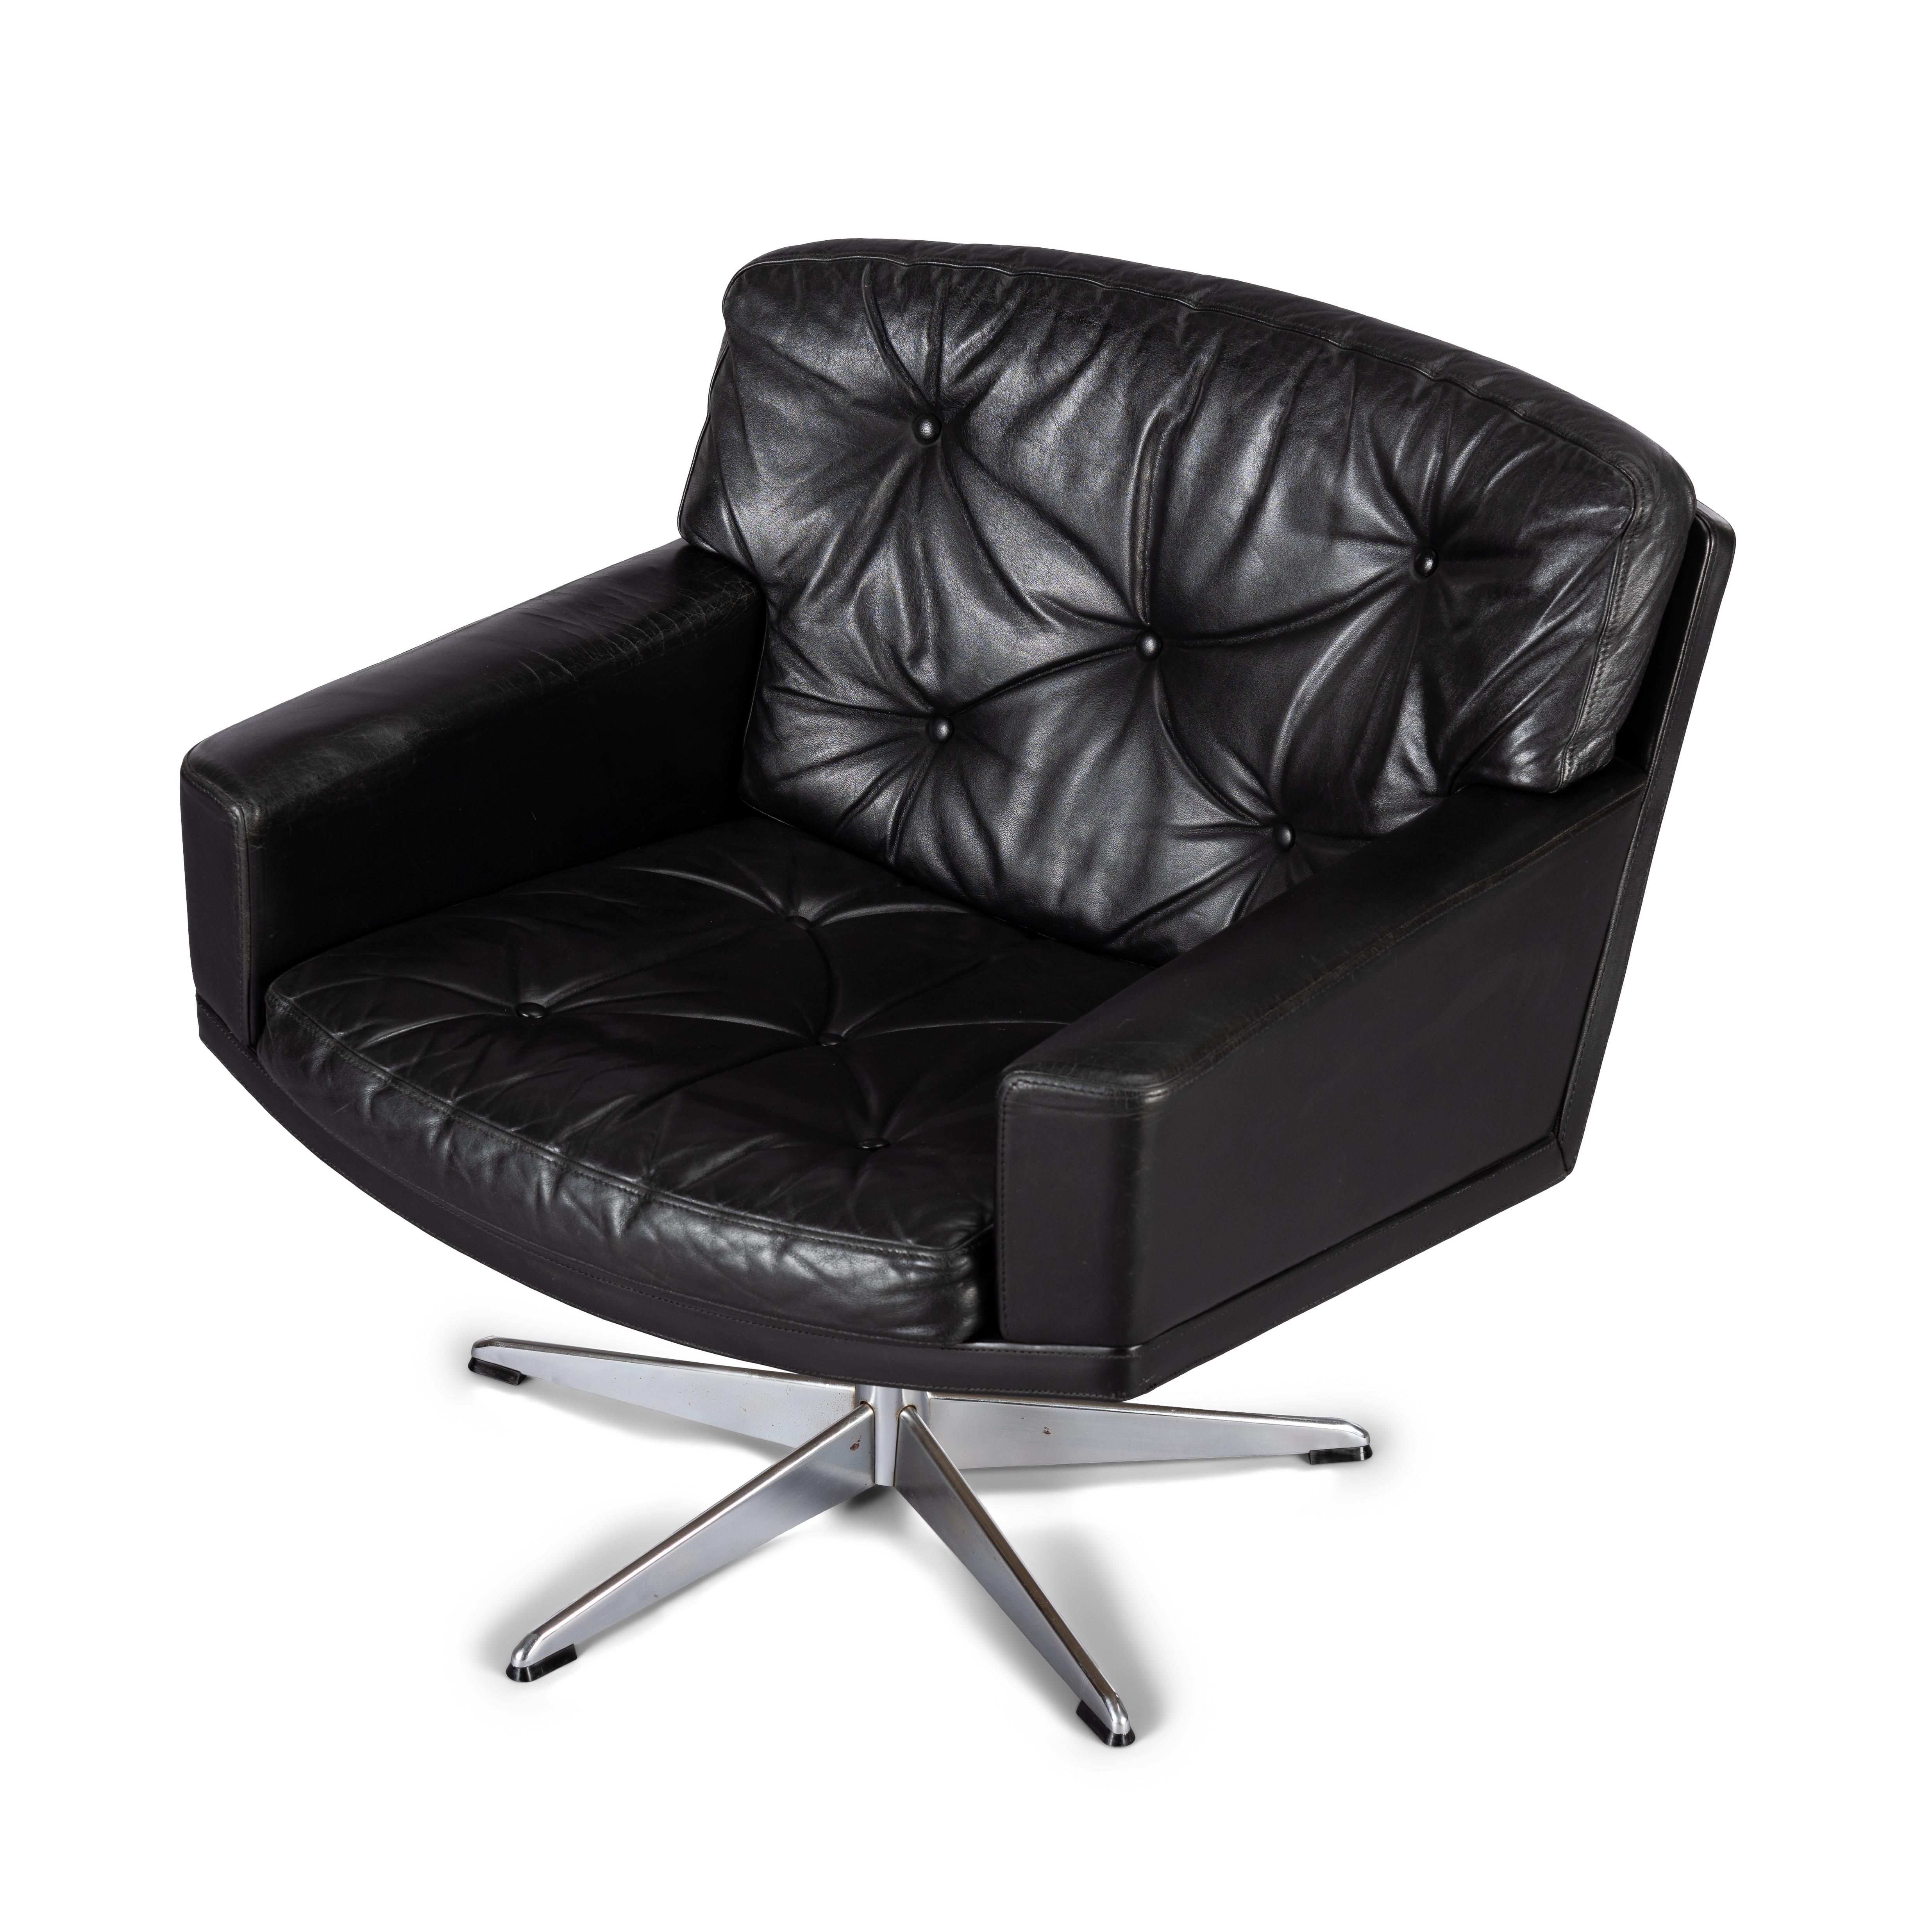 Mid-Century Modern black leather and chromed metal Danish 'Mama' swivel chair that will make Lita Ford drool. All is still in fully original condition and upholstery. The leather is in remarkable condition with just the right vintage patina everyone